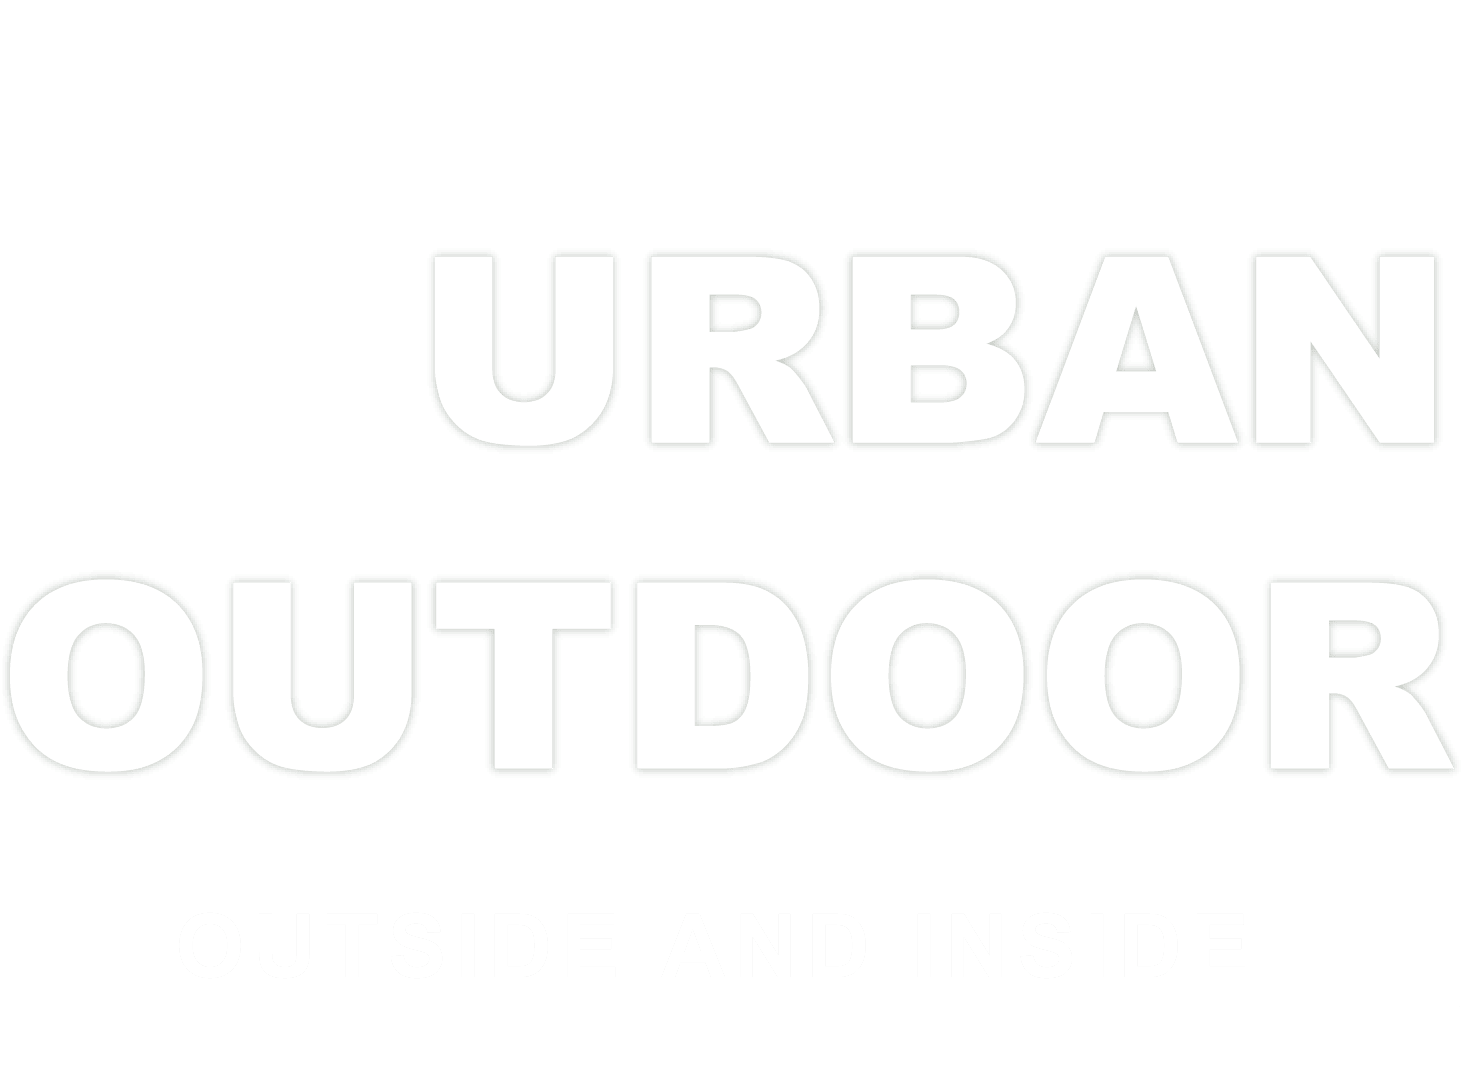 plan urban outdoor outside and inside